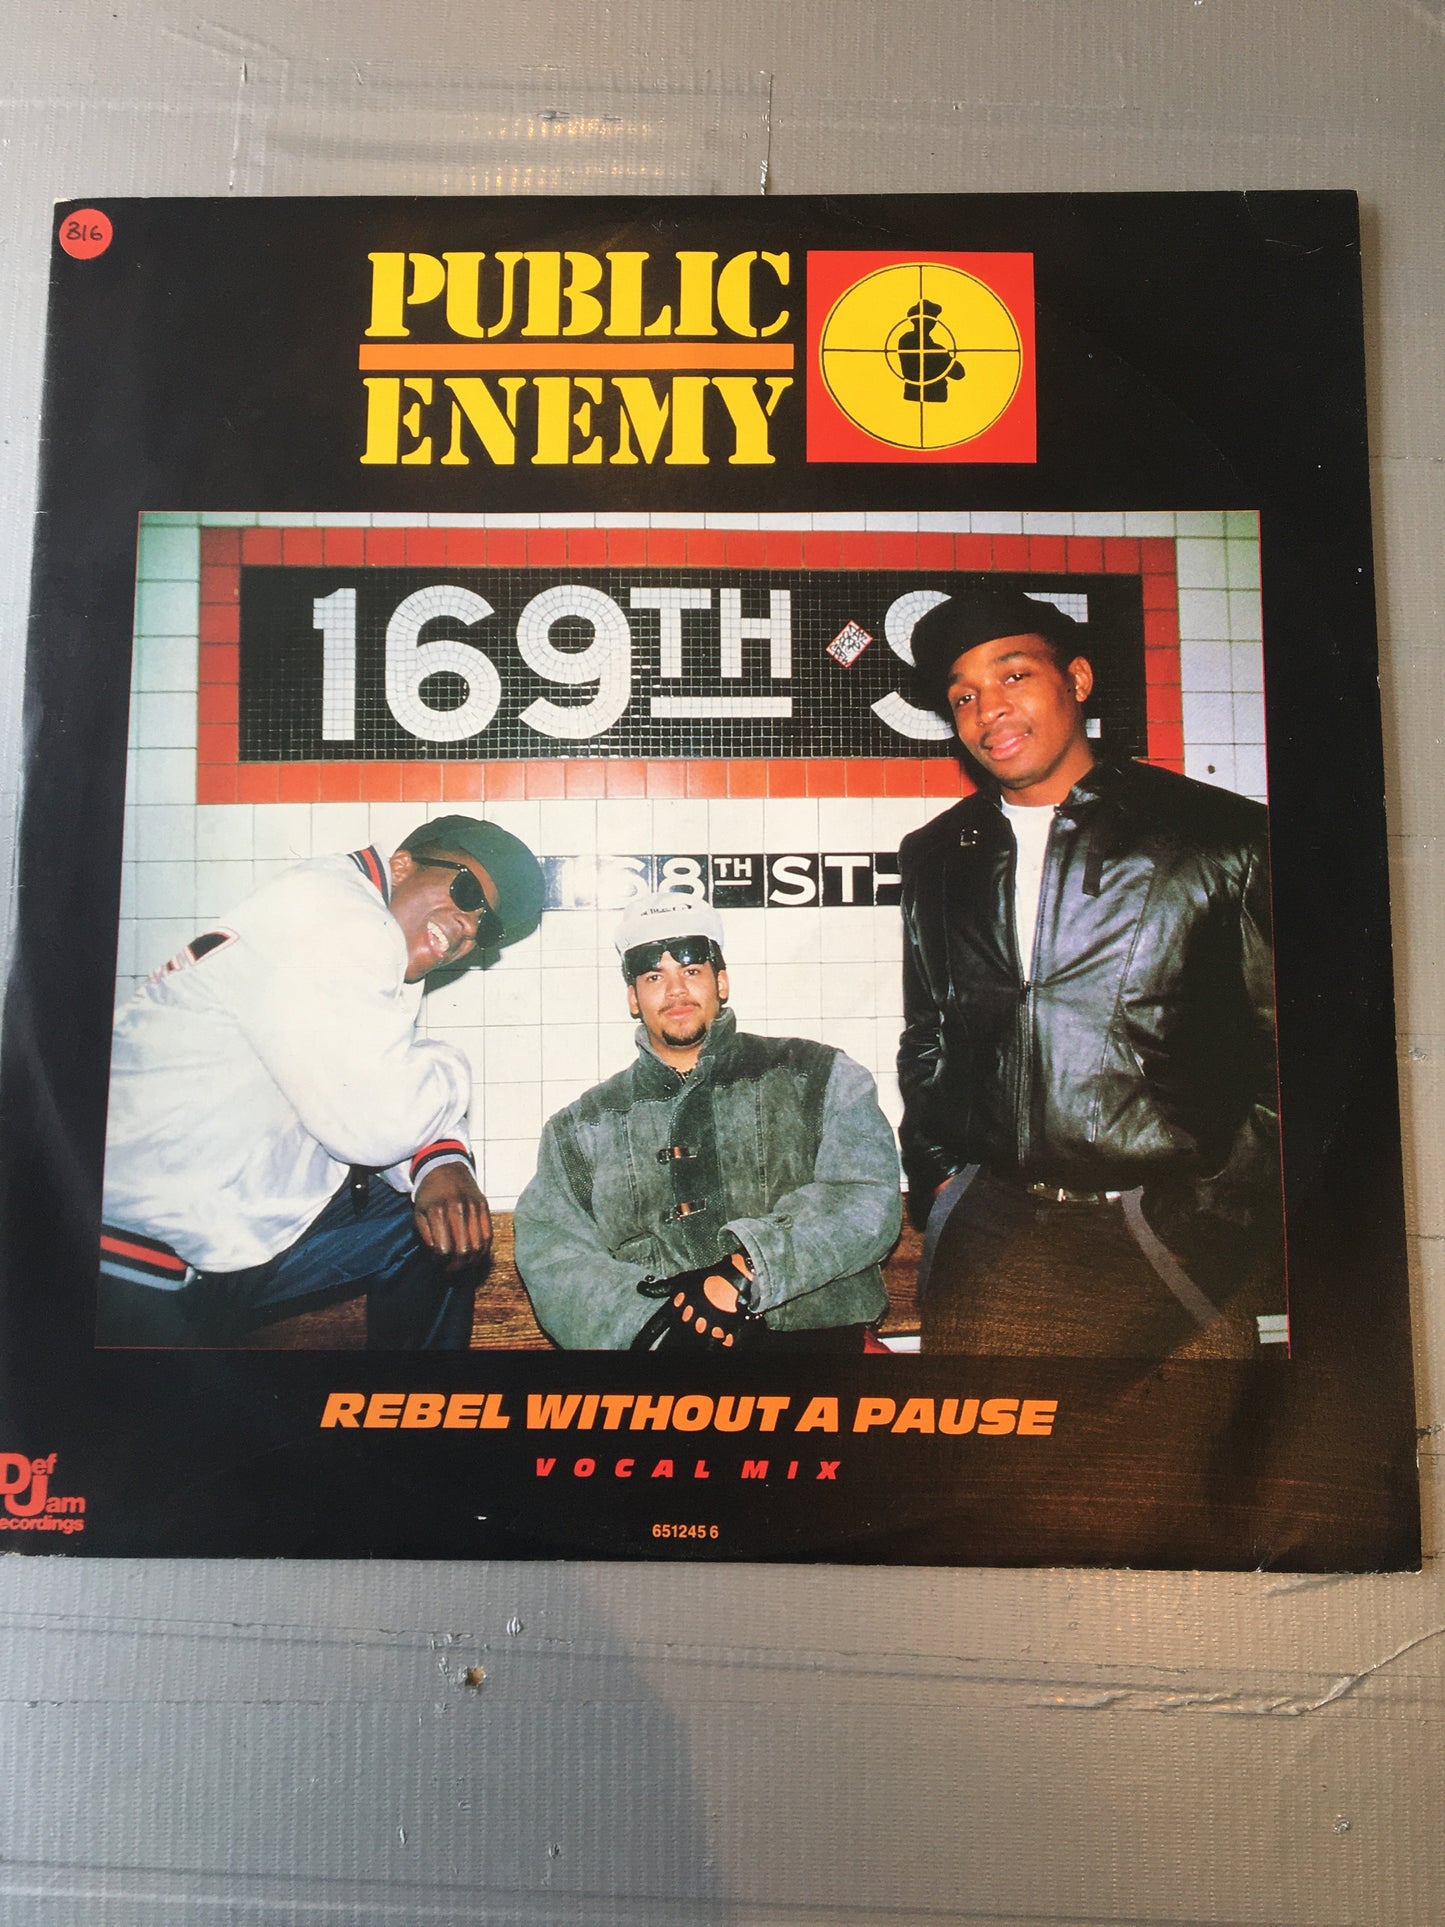 PUBLIC ENEMY 12”REBEL WITHOUT A PAUSE